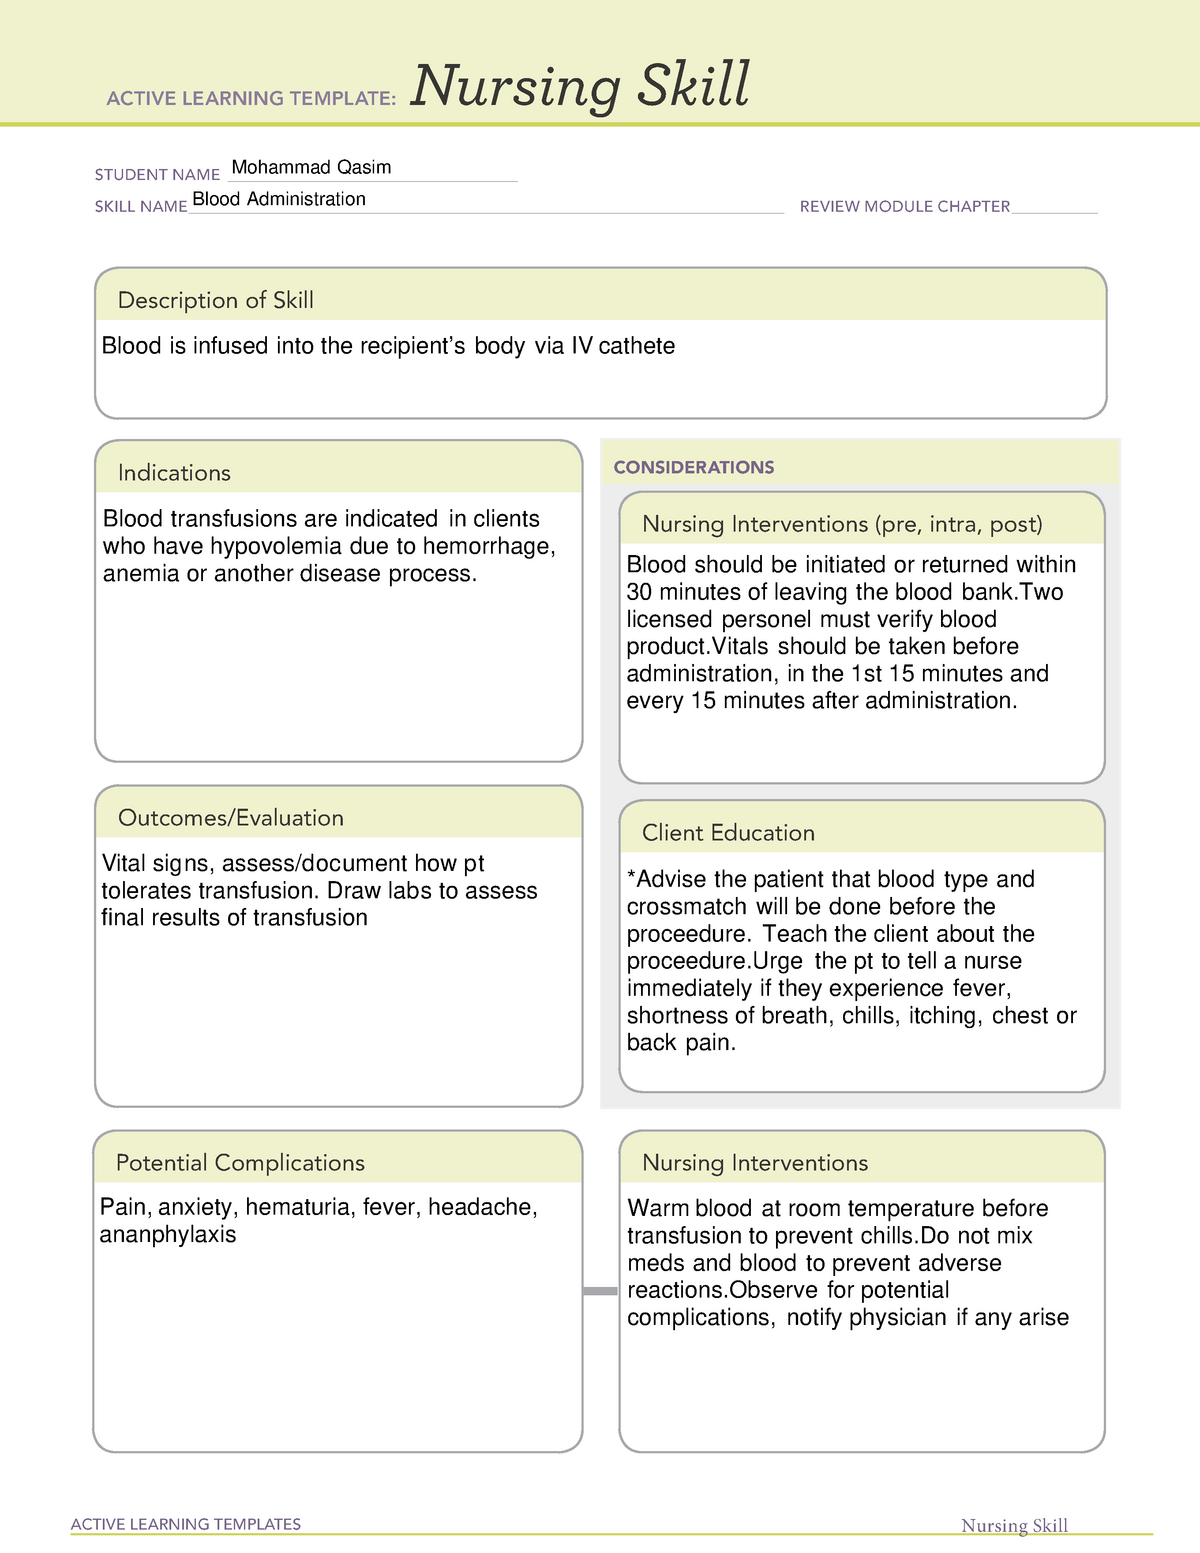 Blood Admnistratoin - ati template skill - ACTIVE LEARNING TEMPLATES ...